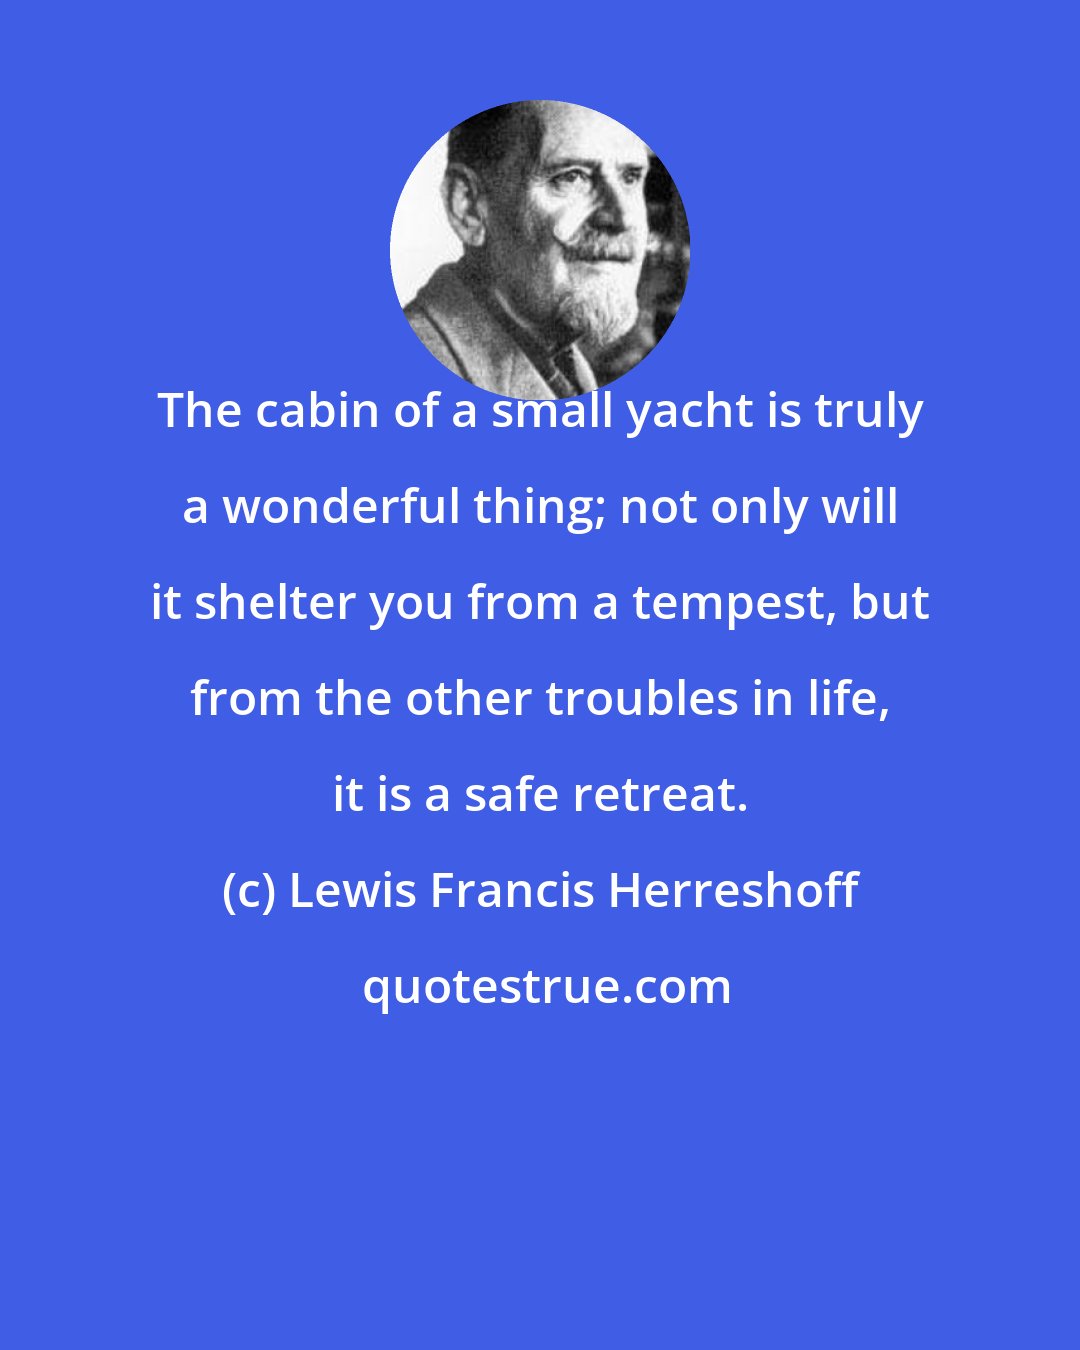 Lewis Francis Herreshoff: The cabin of a small yacht is truly a wonderful thing; not only will it shelter you from a tempest, but from the other troubles in life, it is a safe retreat.